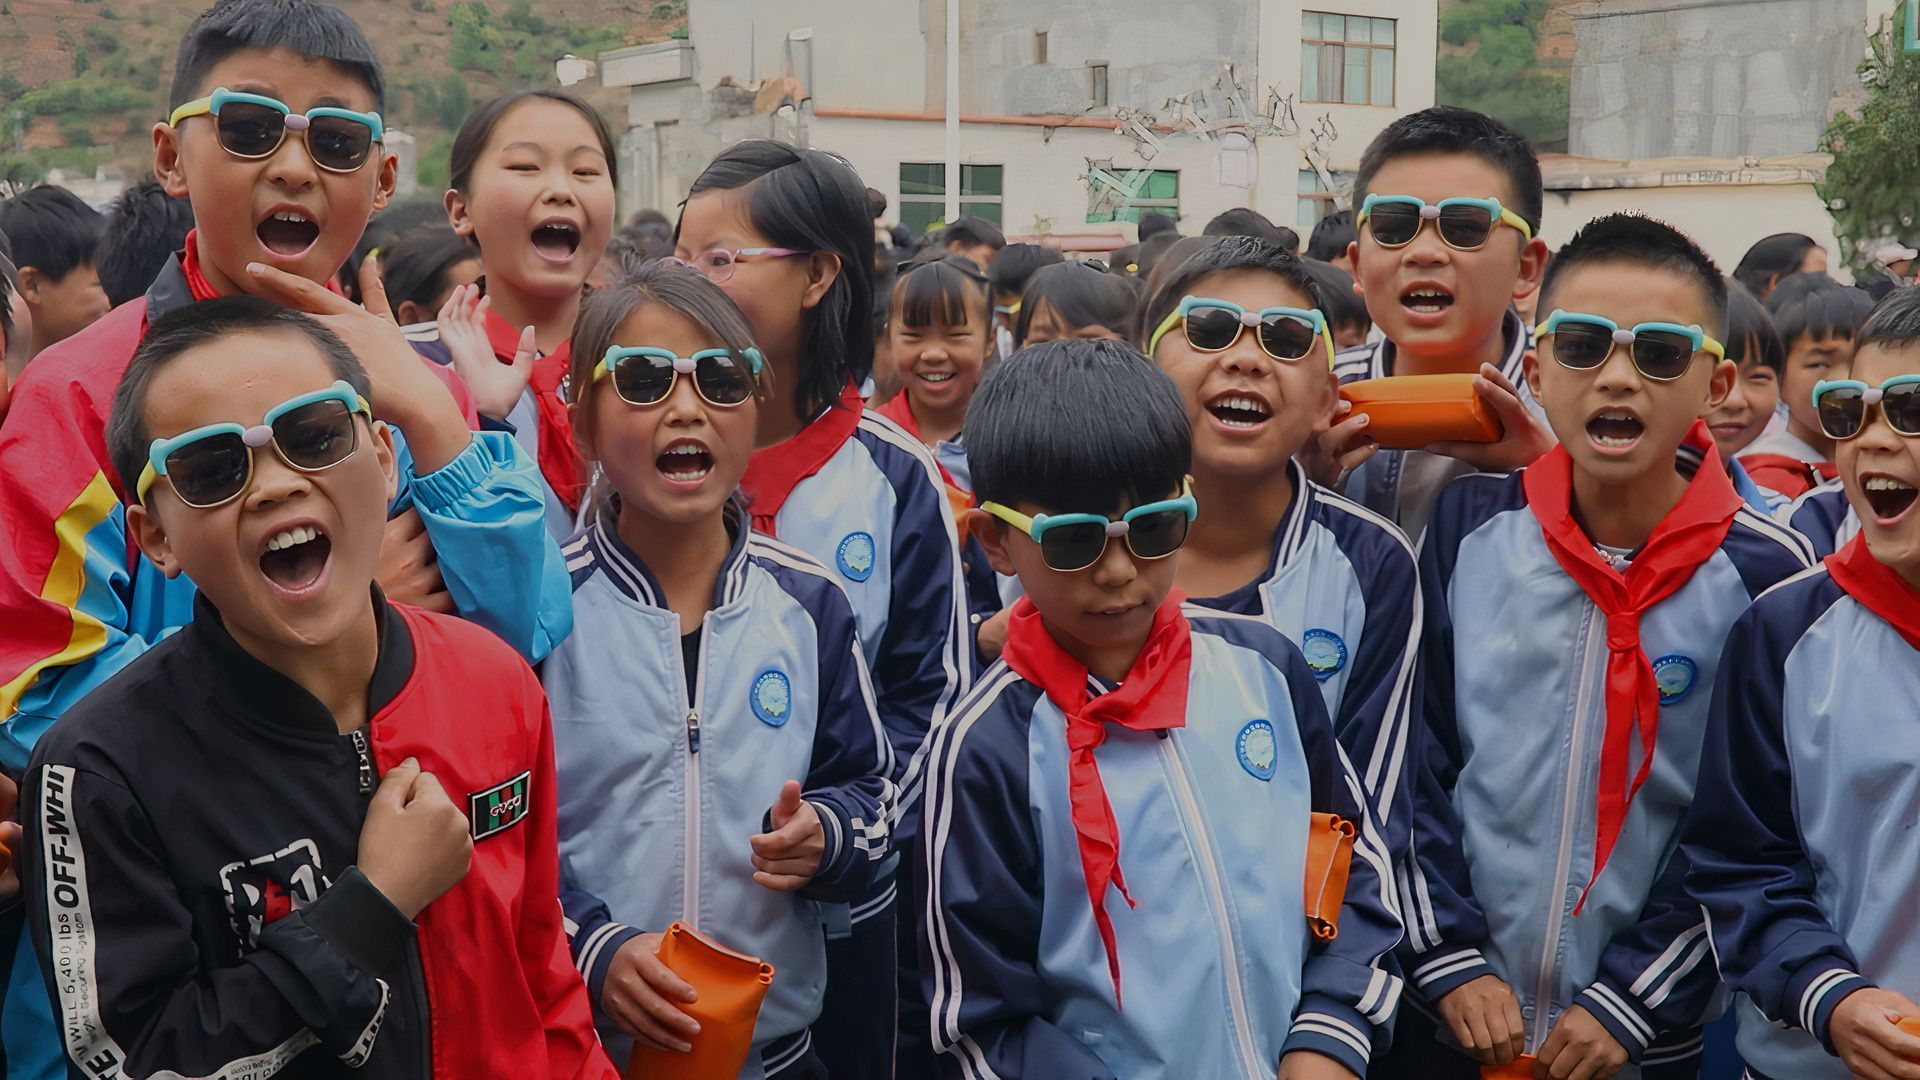 Children in Asia wearing sunglasses and smiling